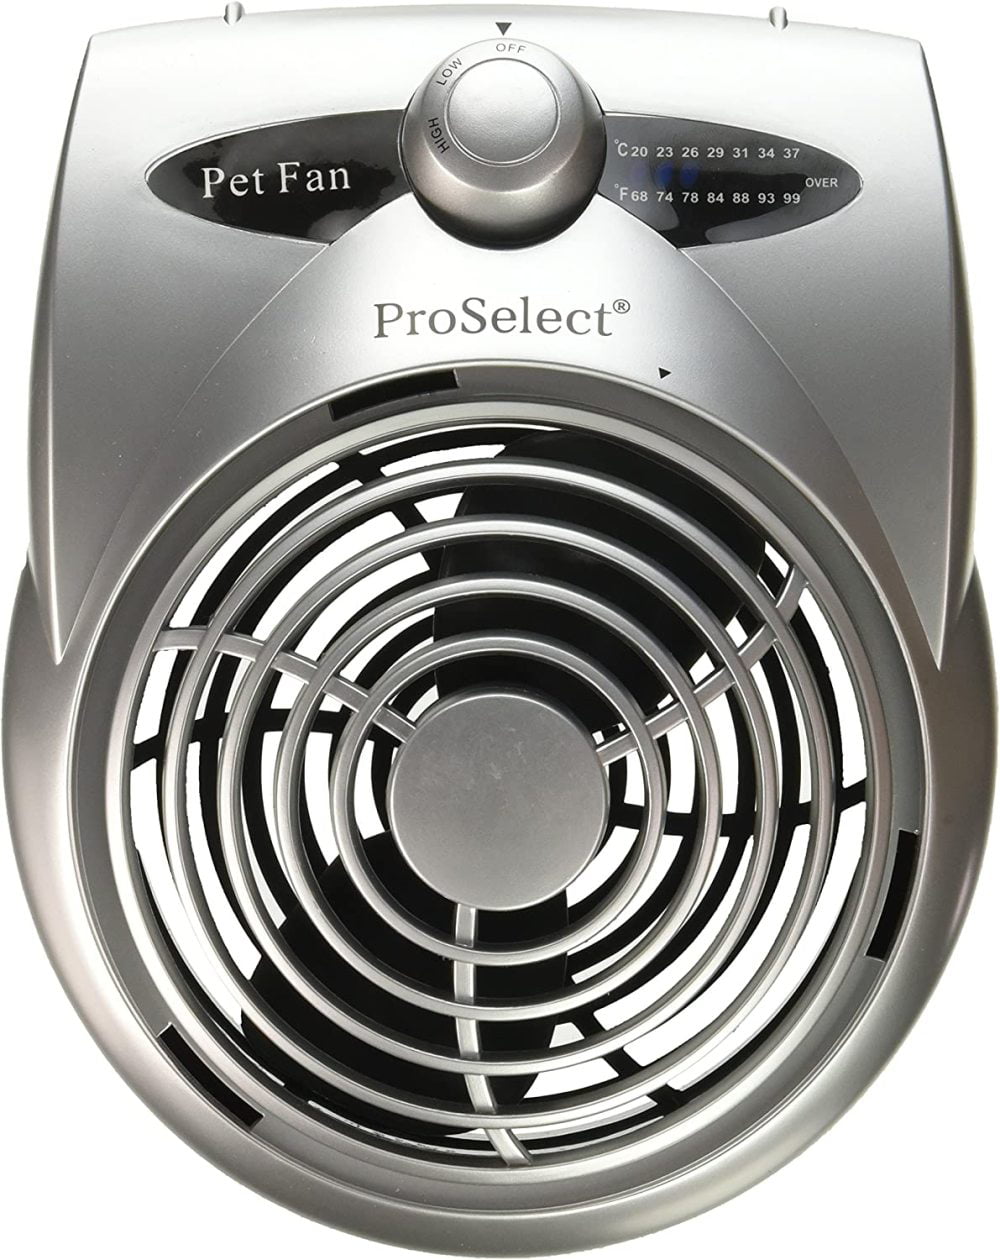 Cool Pup Crate Fan 8x6.25x2.5” in Size Quiet Battery Fan Keeps Dogs & Cats Cool with Built-in Thermometer 